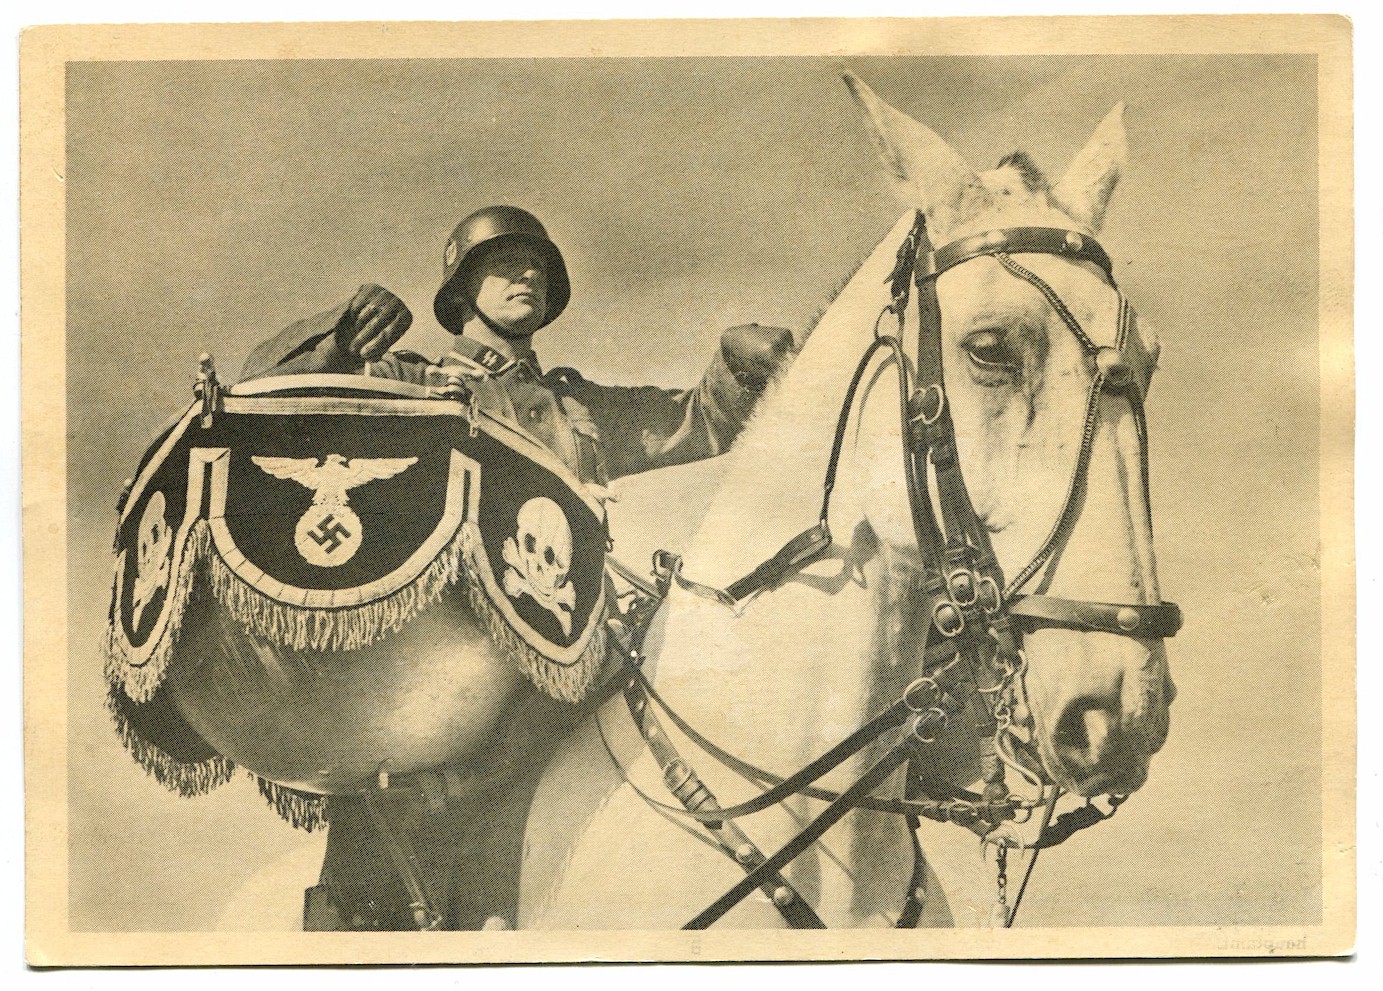 UNSERE WAFFEN SS POST CARD "THE KETTLE DRUMMER OF THE BUGLE COPRS IN A SS CALVARY DIVISION"